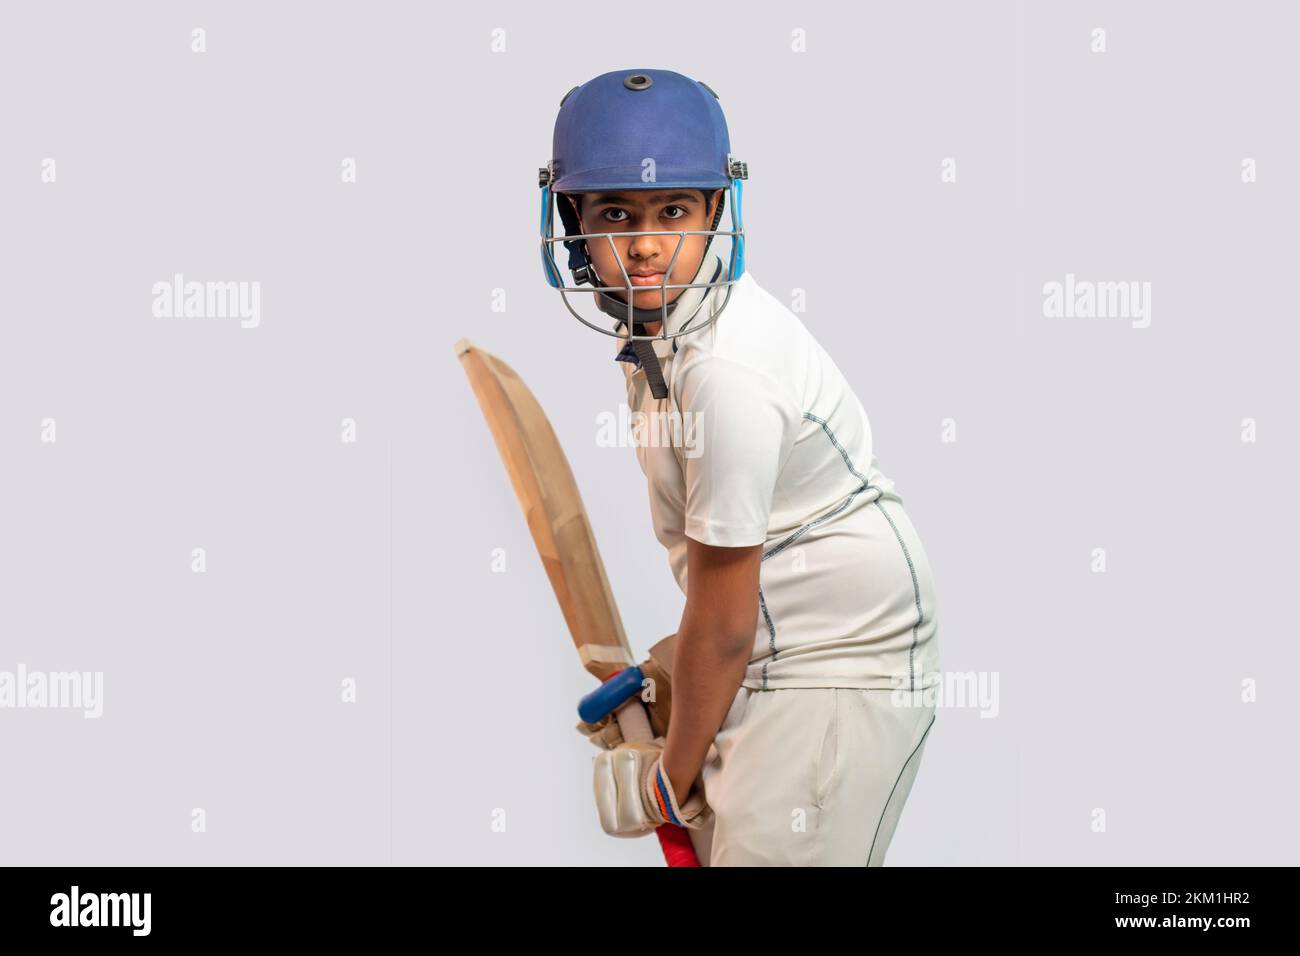 Portrait of boy getting ready to strike During a Cricket Game Stock Photo